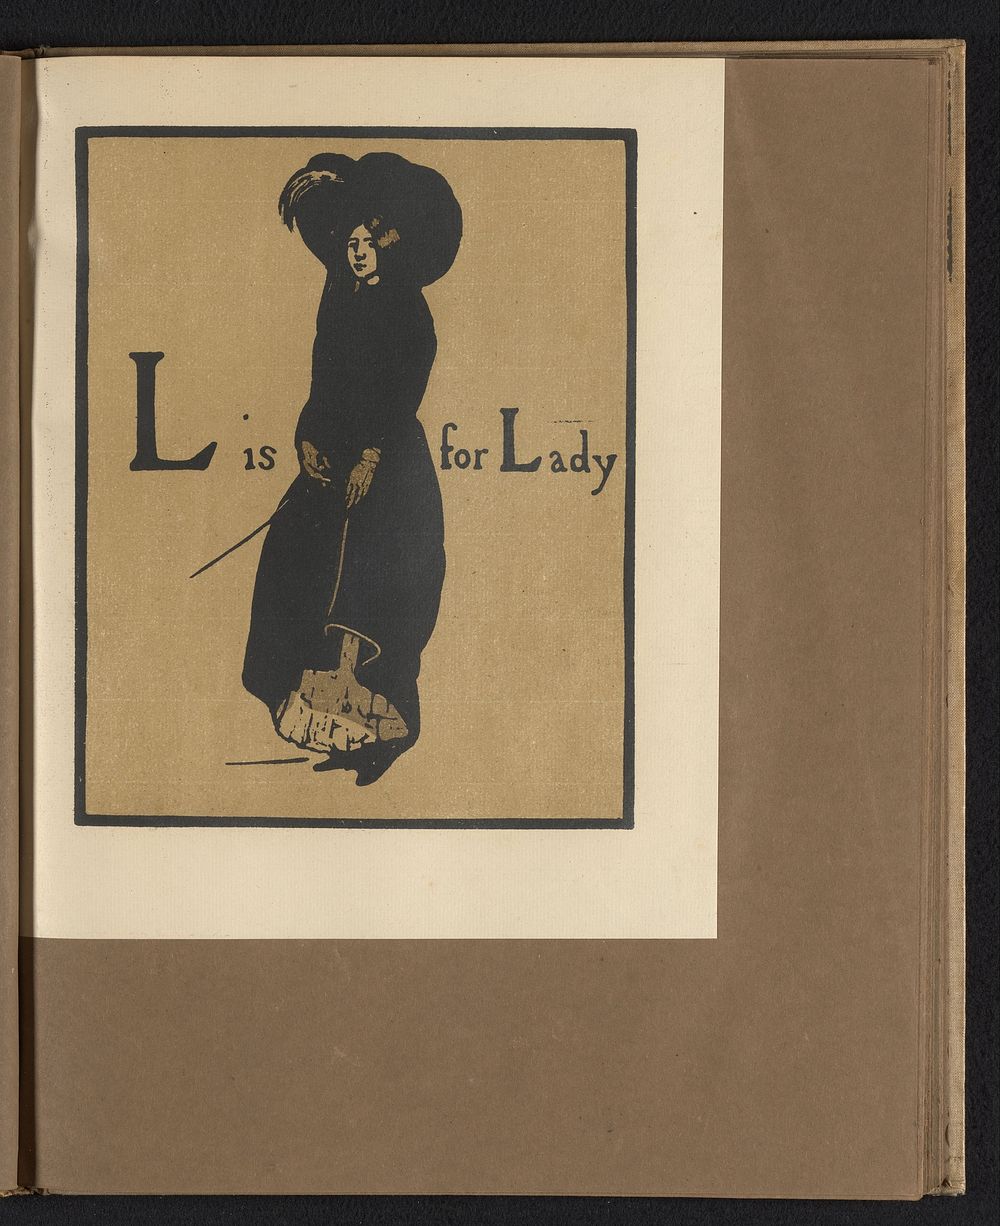 L is for Lady (1898) by William Nicholson and William Heinemann